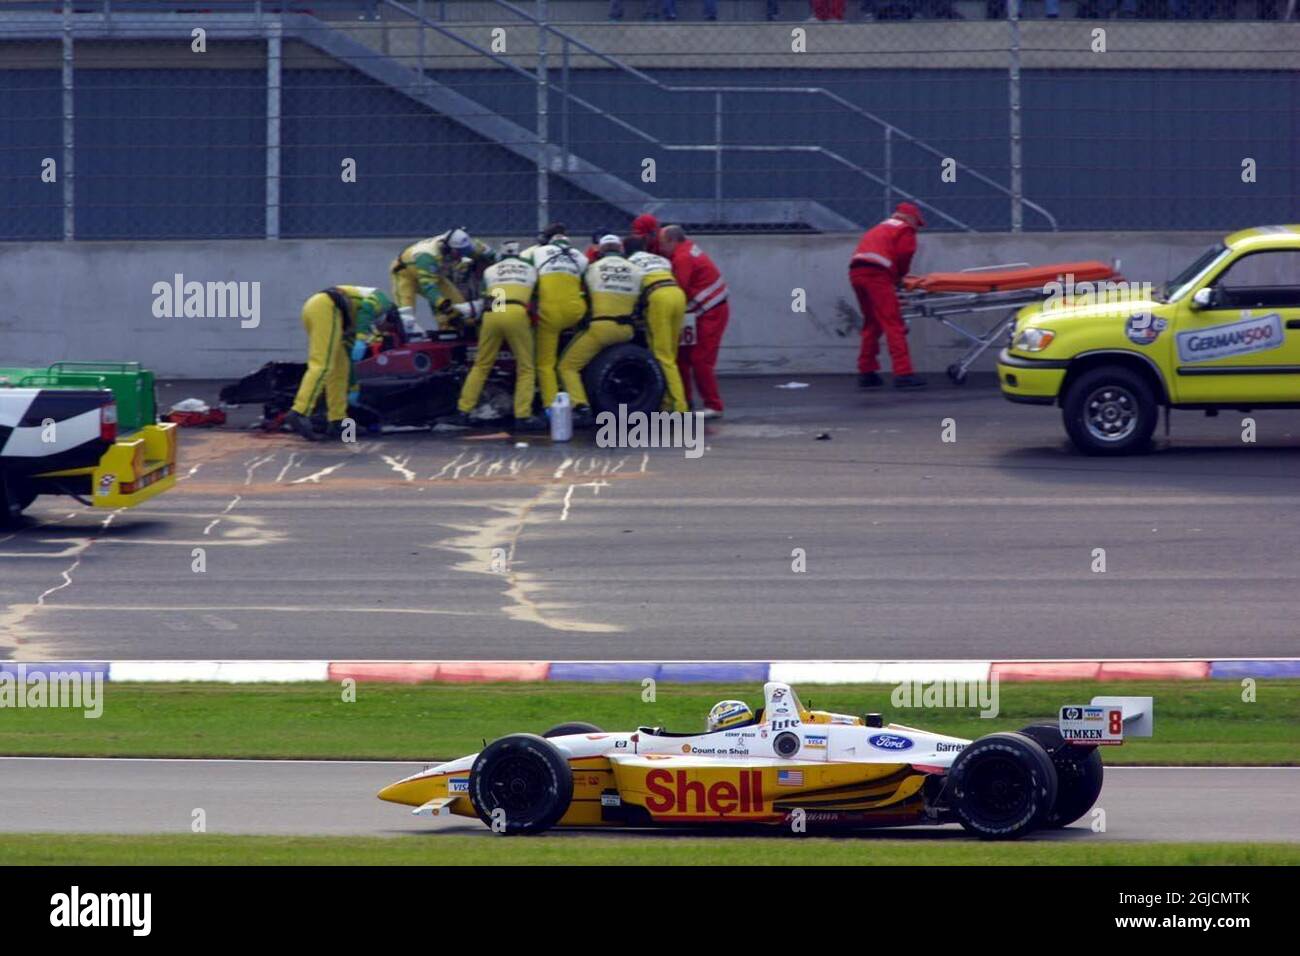 Alex Zanardi is attended to by Marshalls after he was hit by Alex Tagliani as he came out of the pits Stock Photo